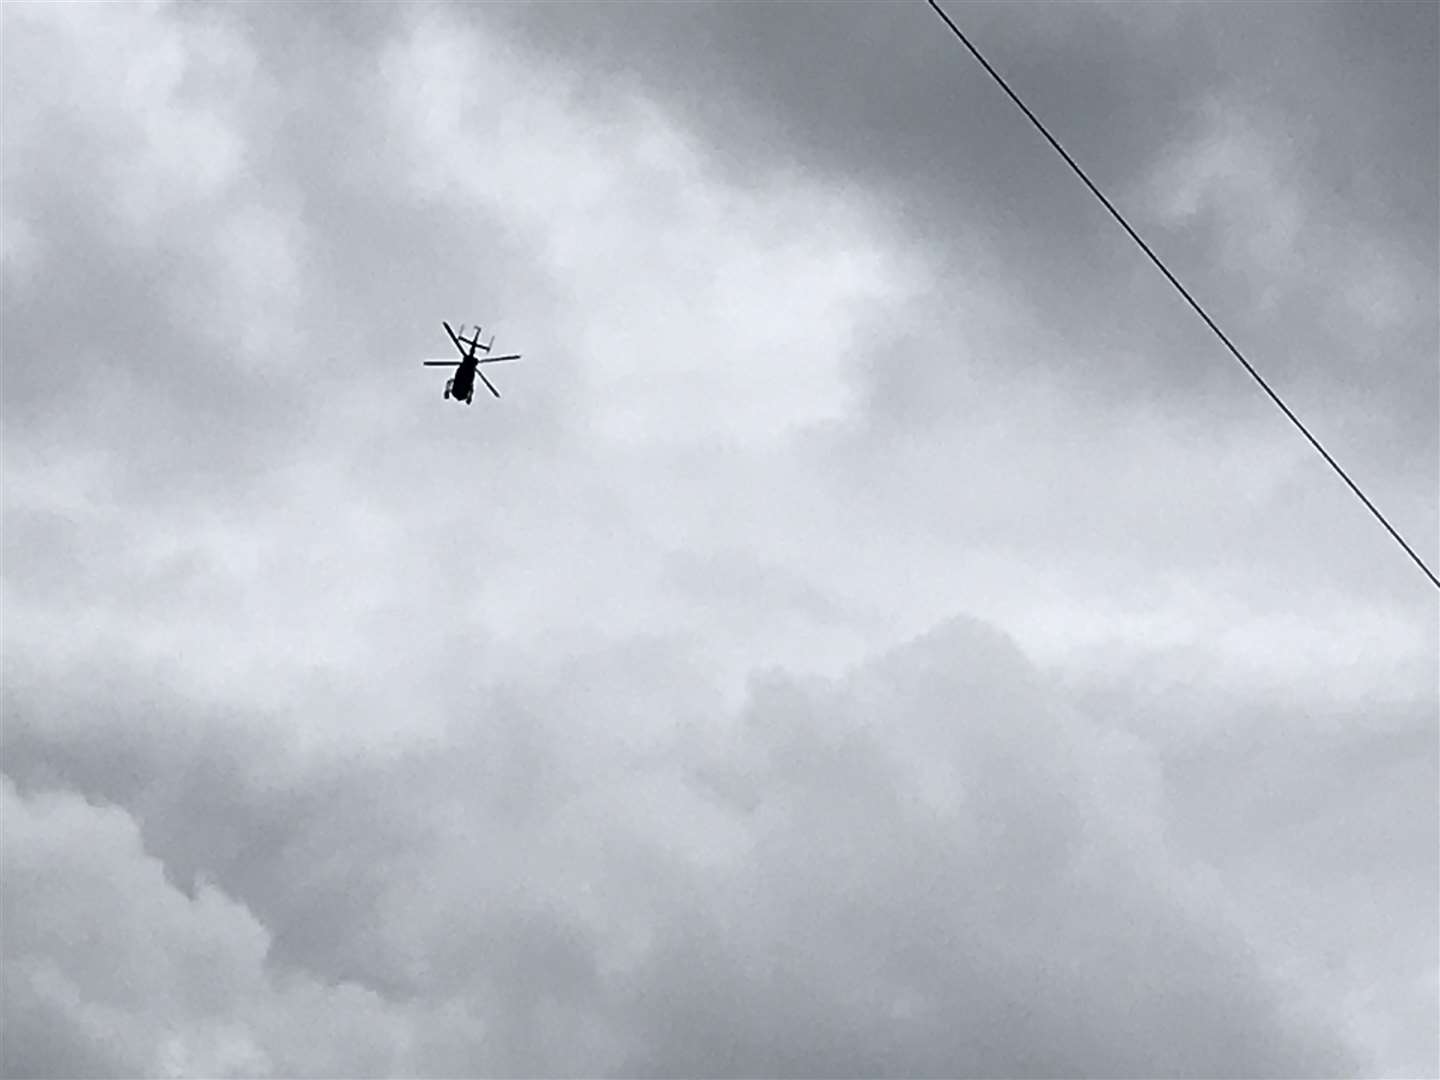 A police helicopter was seen circulating the River Medway